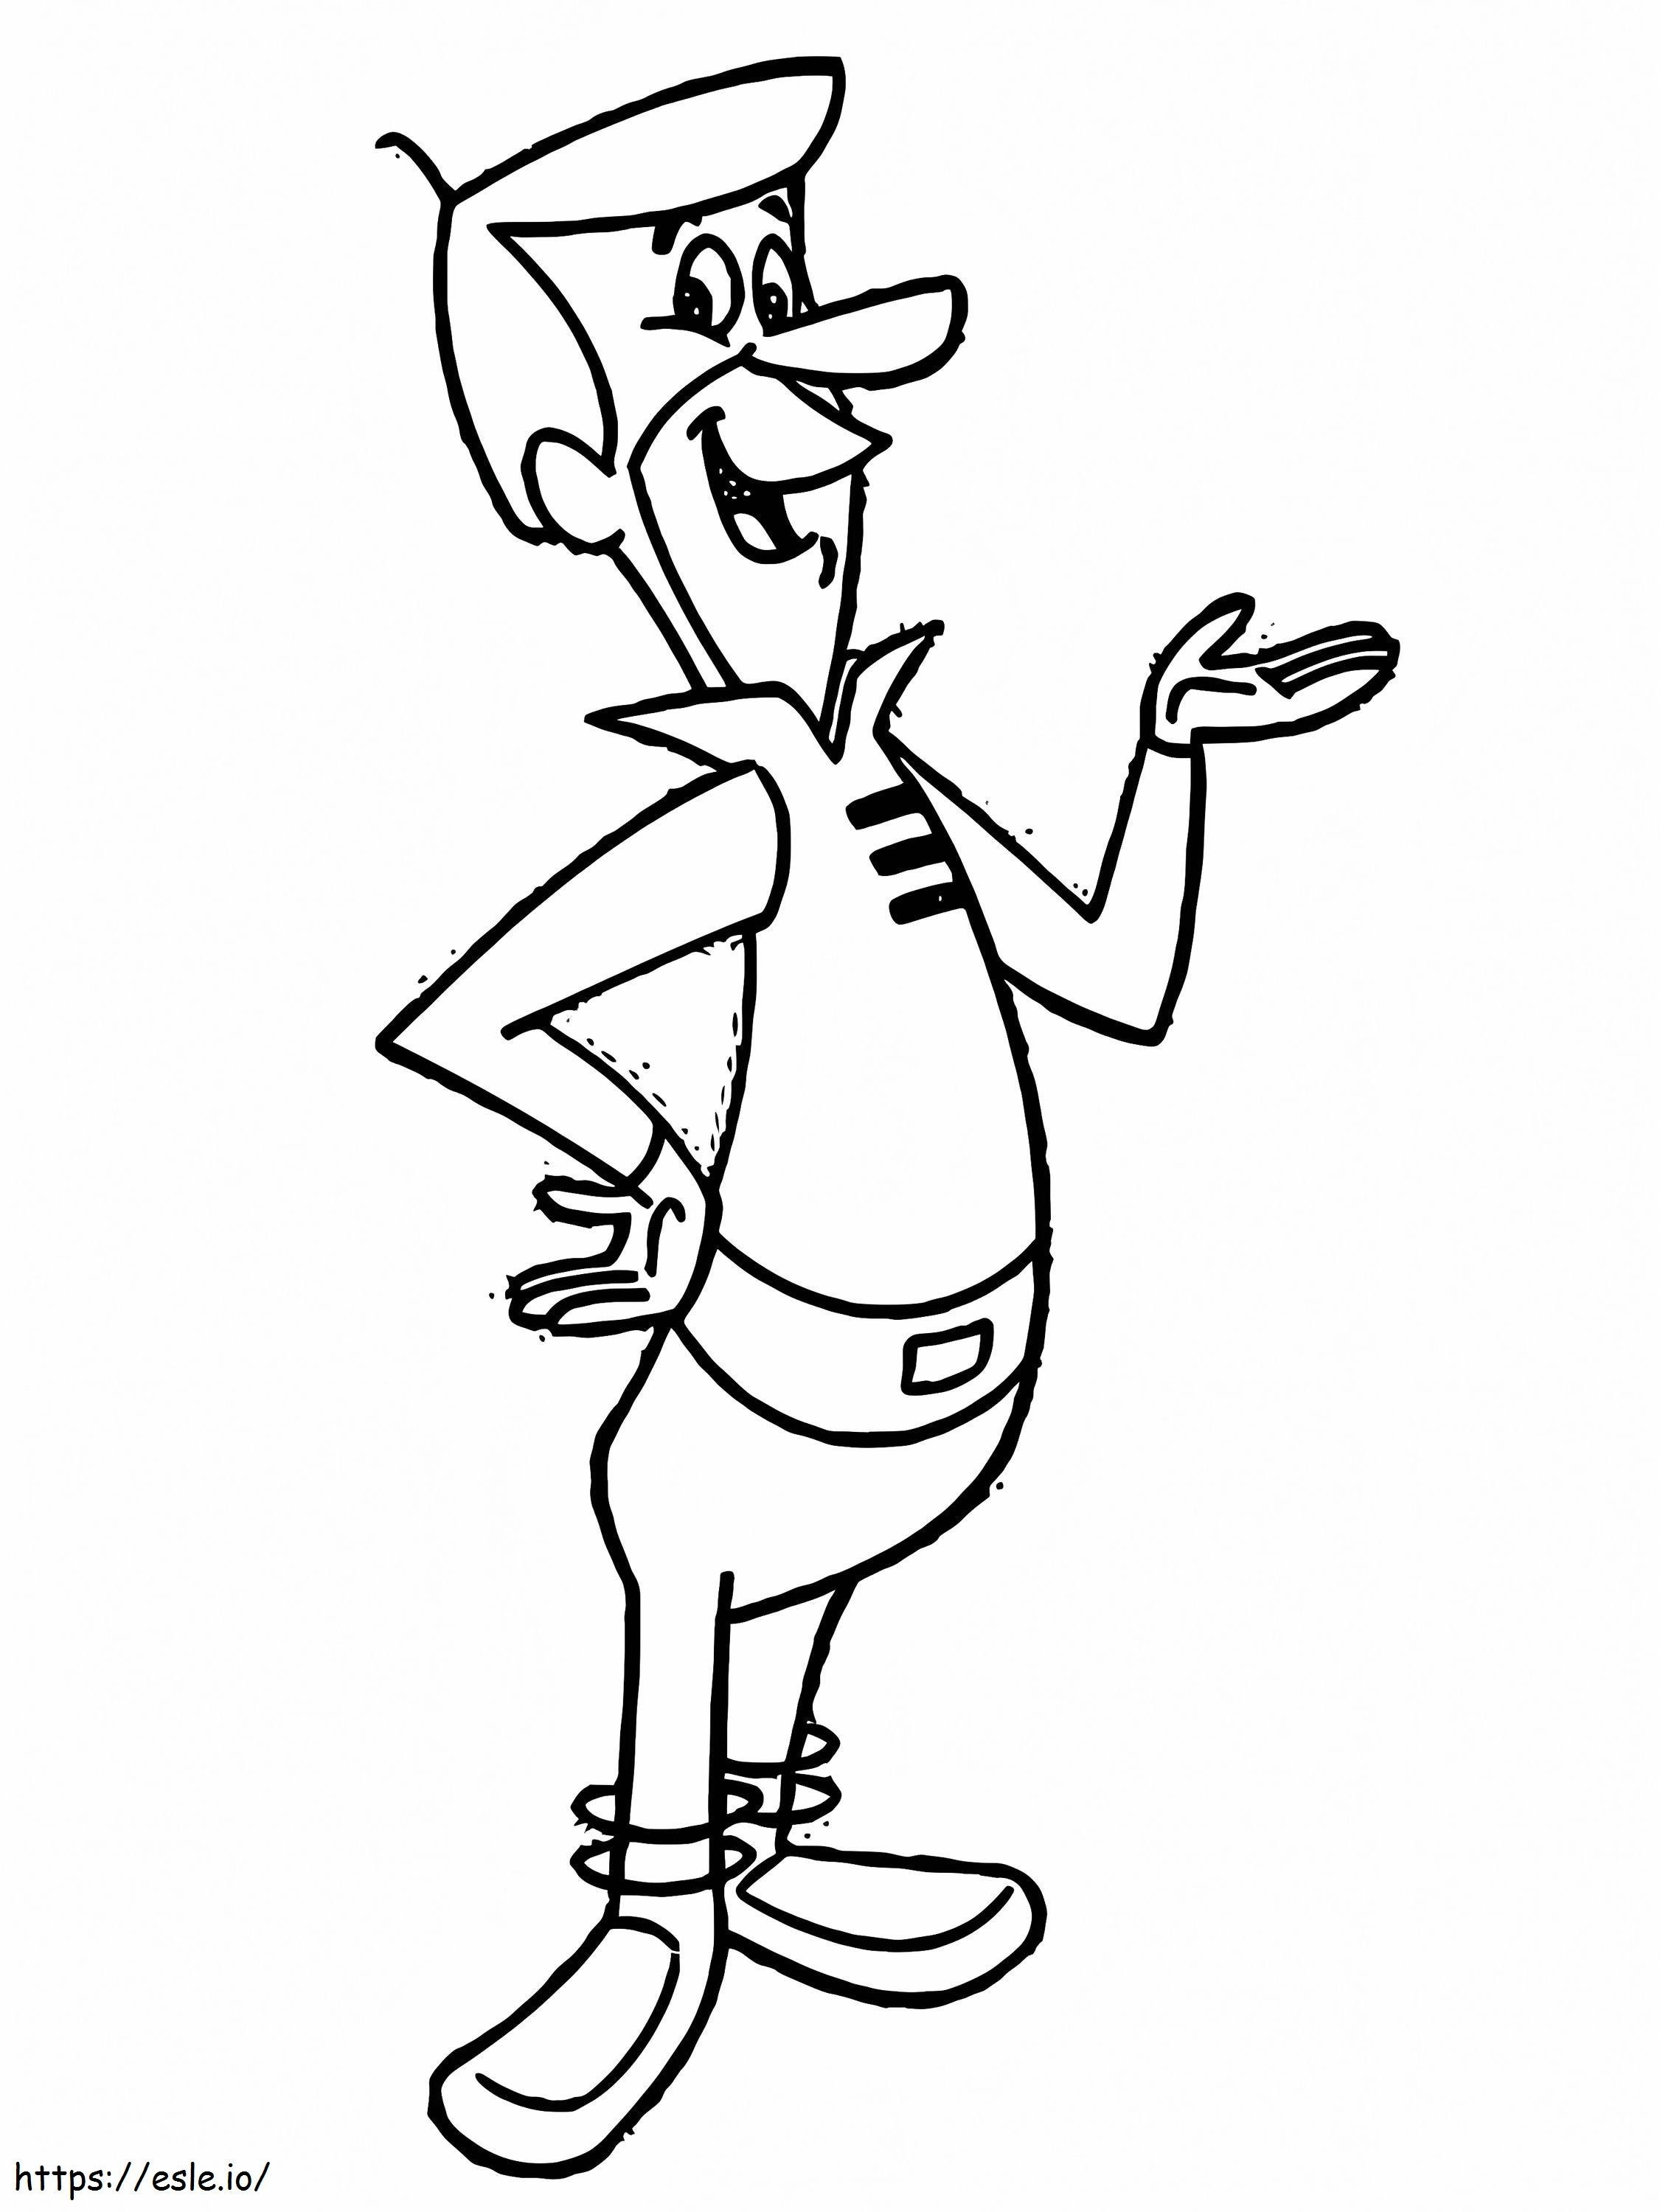 George Jetson coloring page